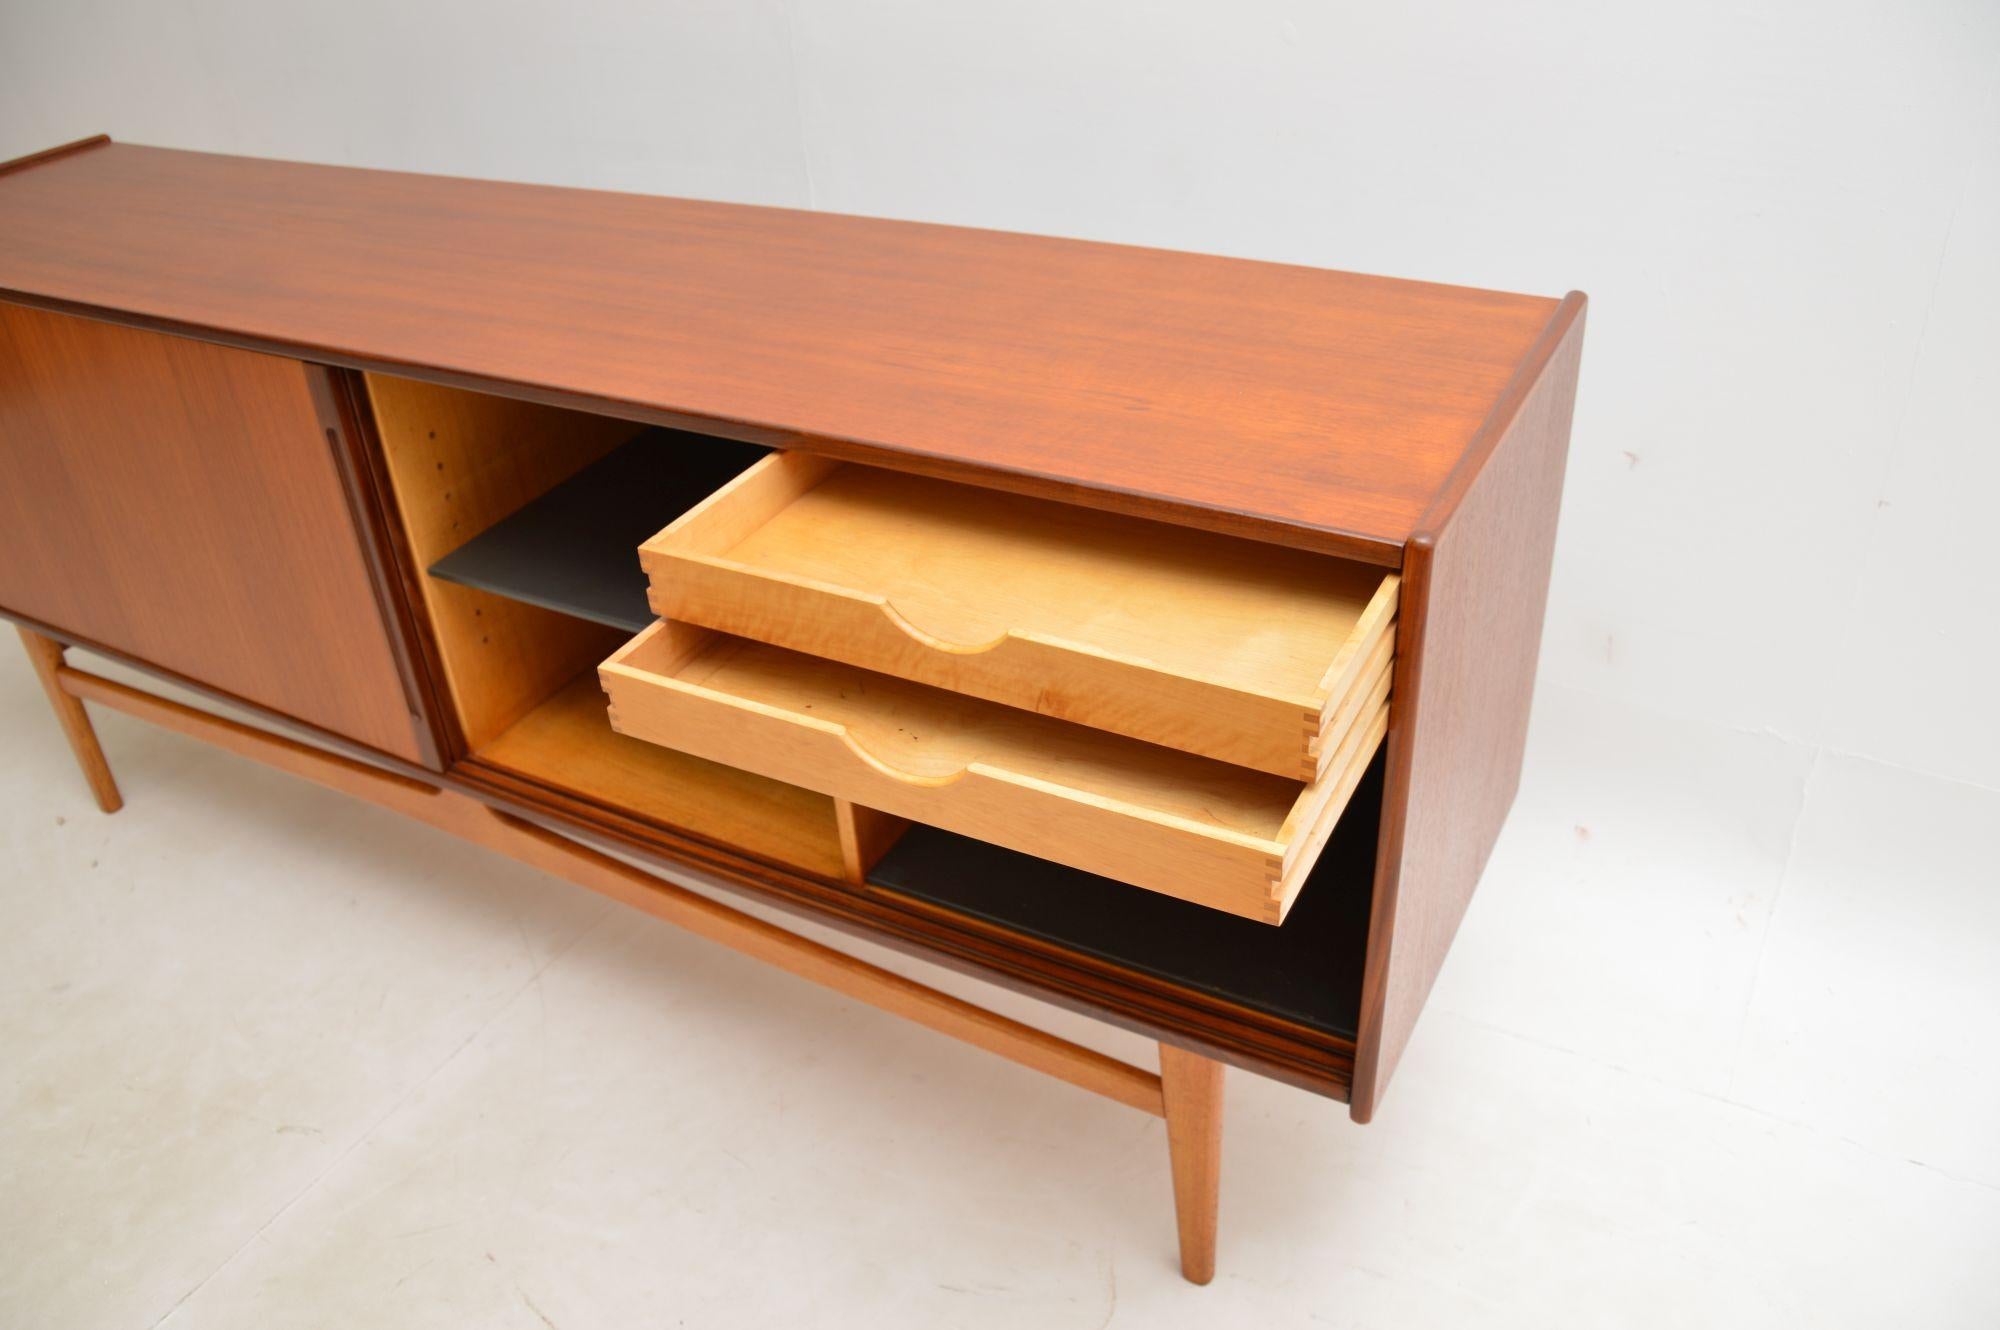 1960s Vintage Danish Teak Sideboard In Good Condition For Sale In London, GB